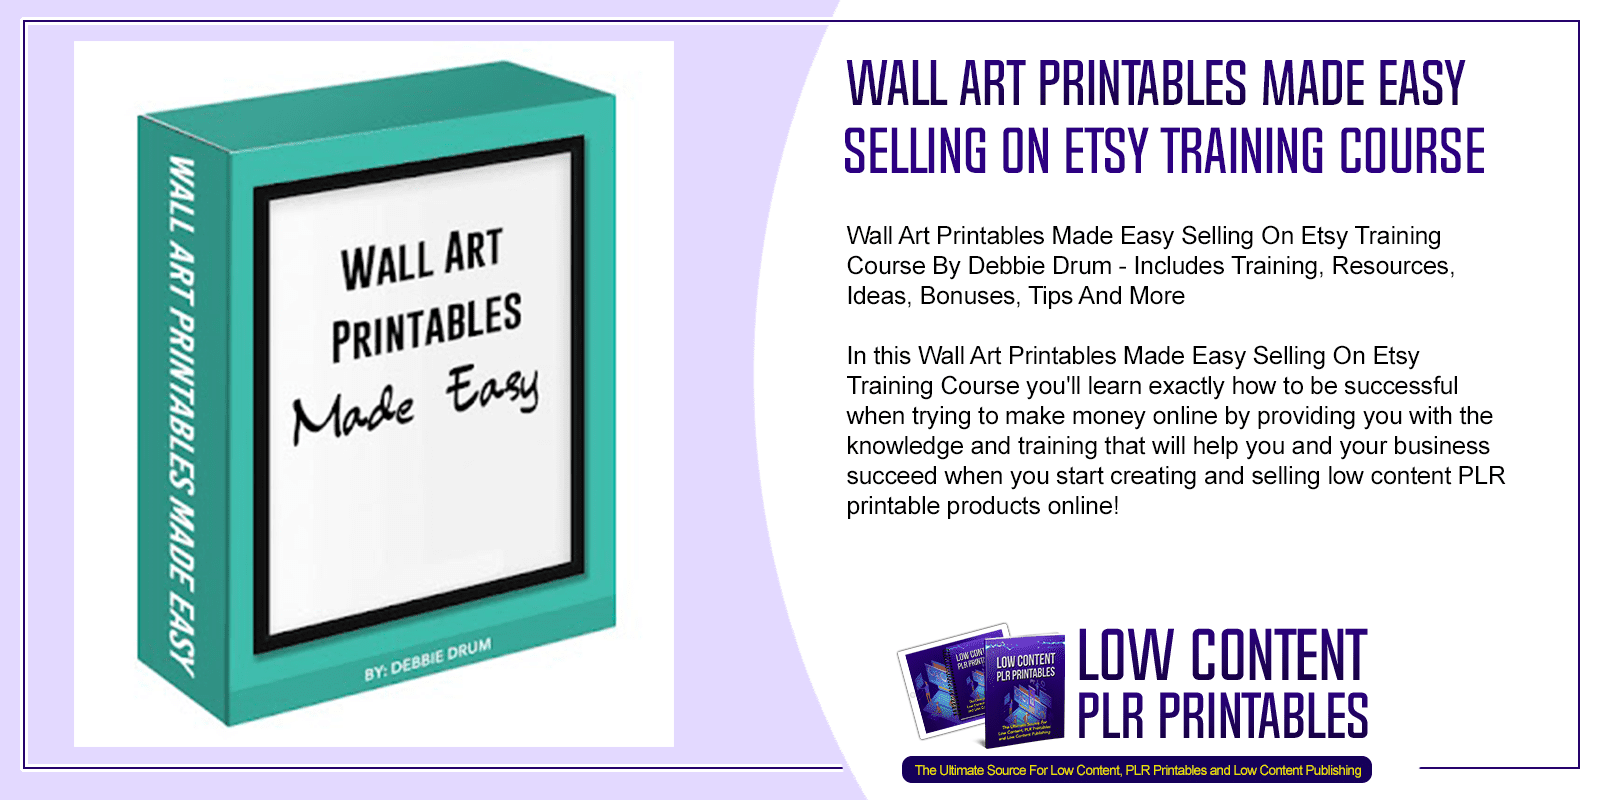 Wall Art Printables Made Easy Selling On Etsy Training Course